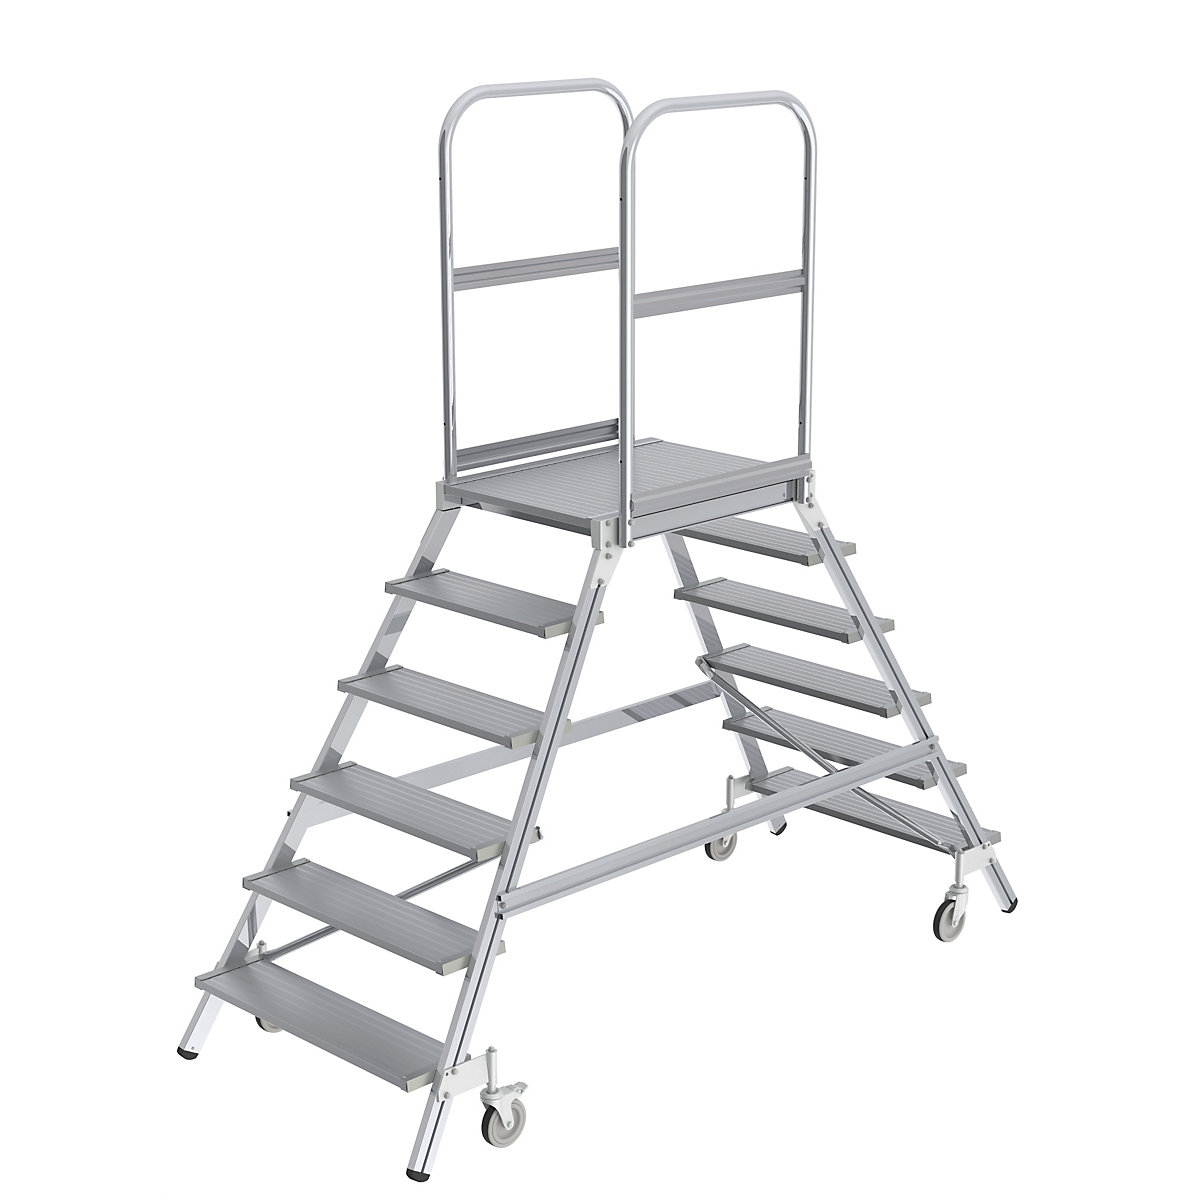 Platform steps with double sided access – MUNK, platform and steps made of light alloy, 2x6 steps inclusive platform-6